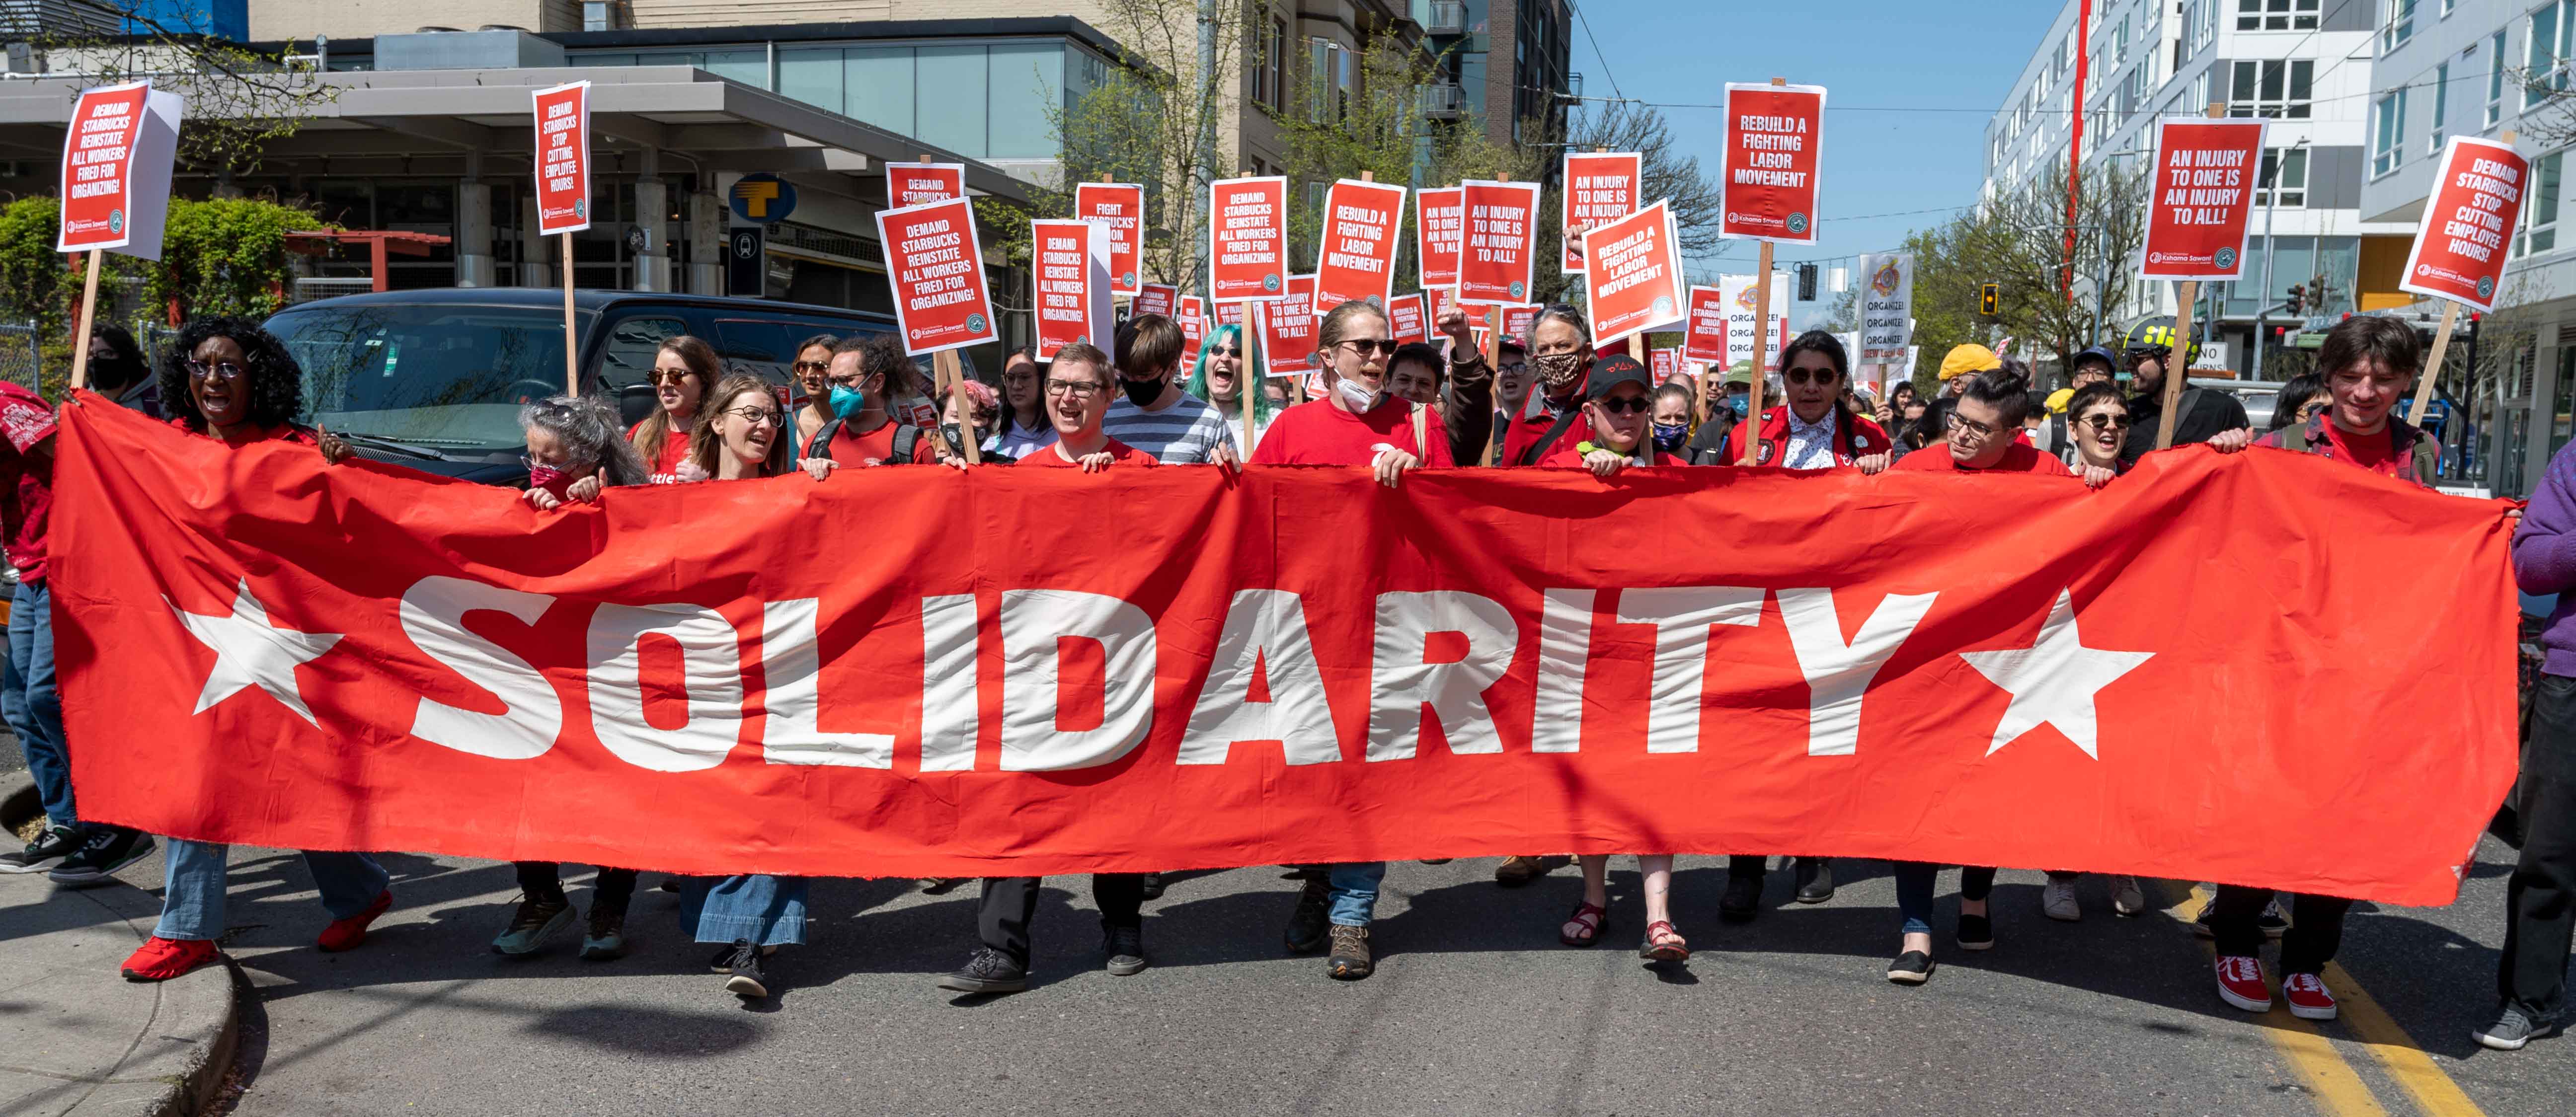 Workers marching behind a large, red sign that says "Solidarity".